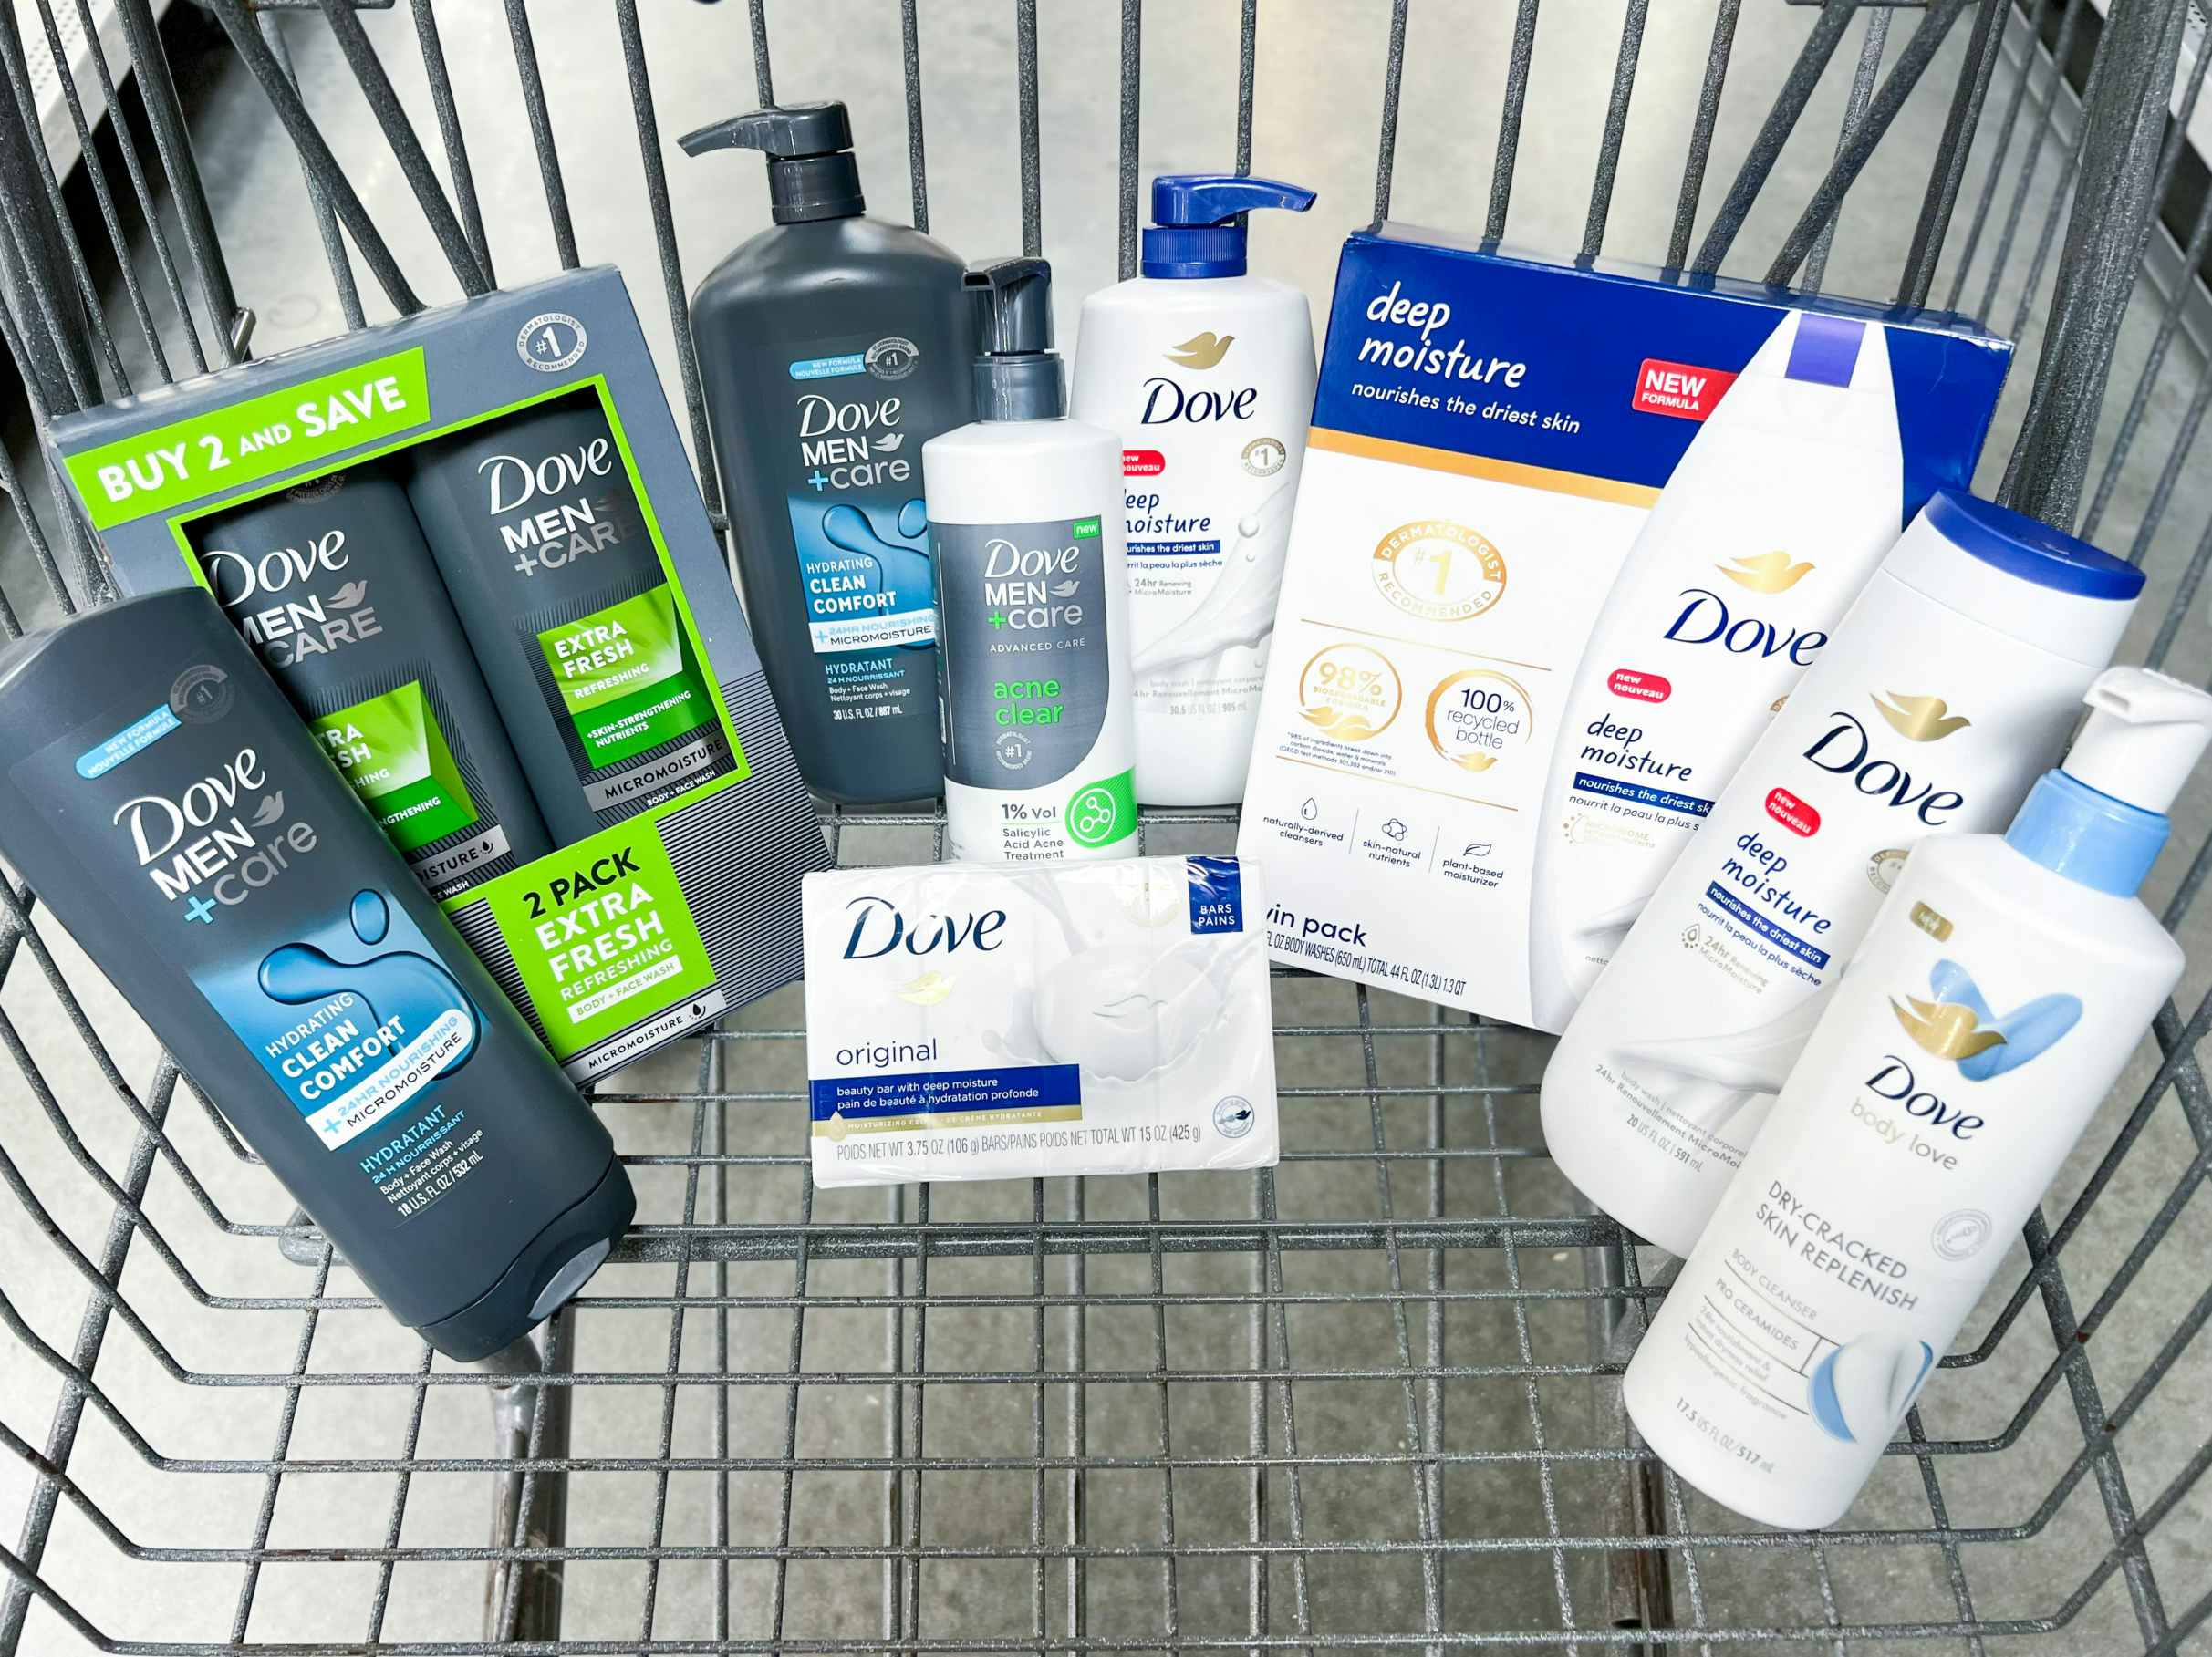 dove and dove men + care body wash, beauty bars soap, body love cleansers, in a cart